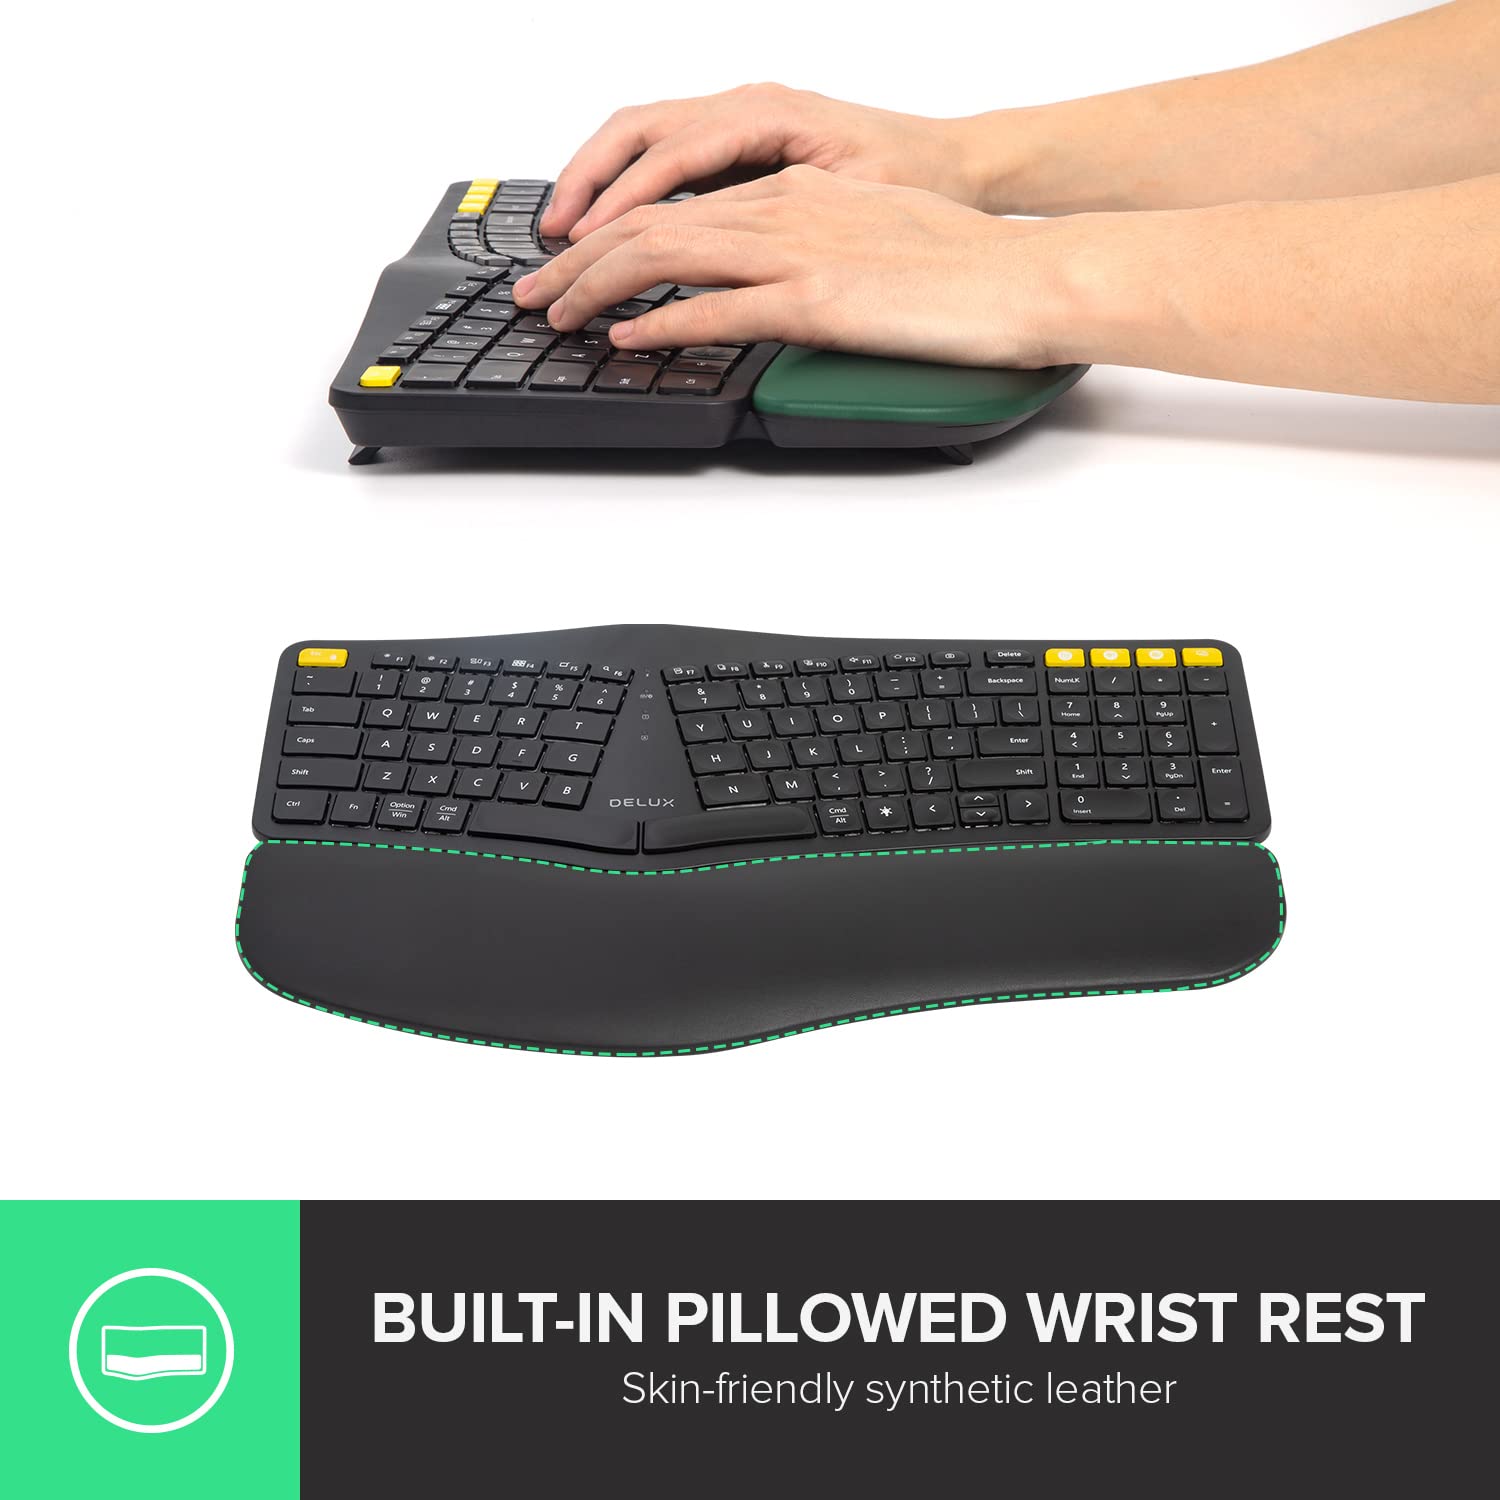 DeLUX Upgraded Ergonomic Wireless Ergo Split Keyboard with Backlit, 2.4G and Bluetooth, Scissor Switch and Palm Rest for Natural Typing, Compatible with Windows and Mac OS (GM902Pro-Black)